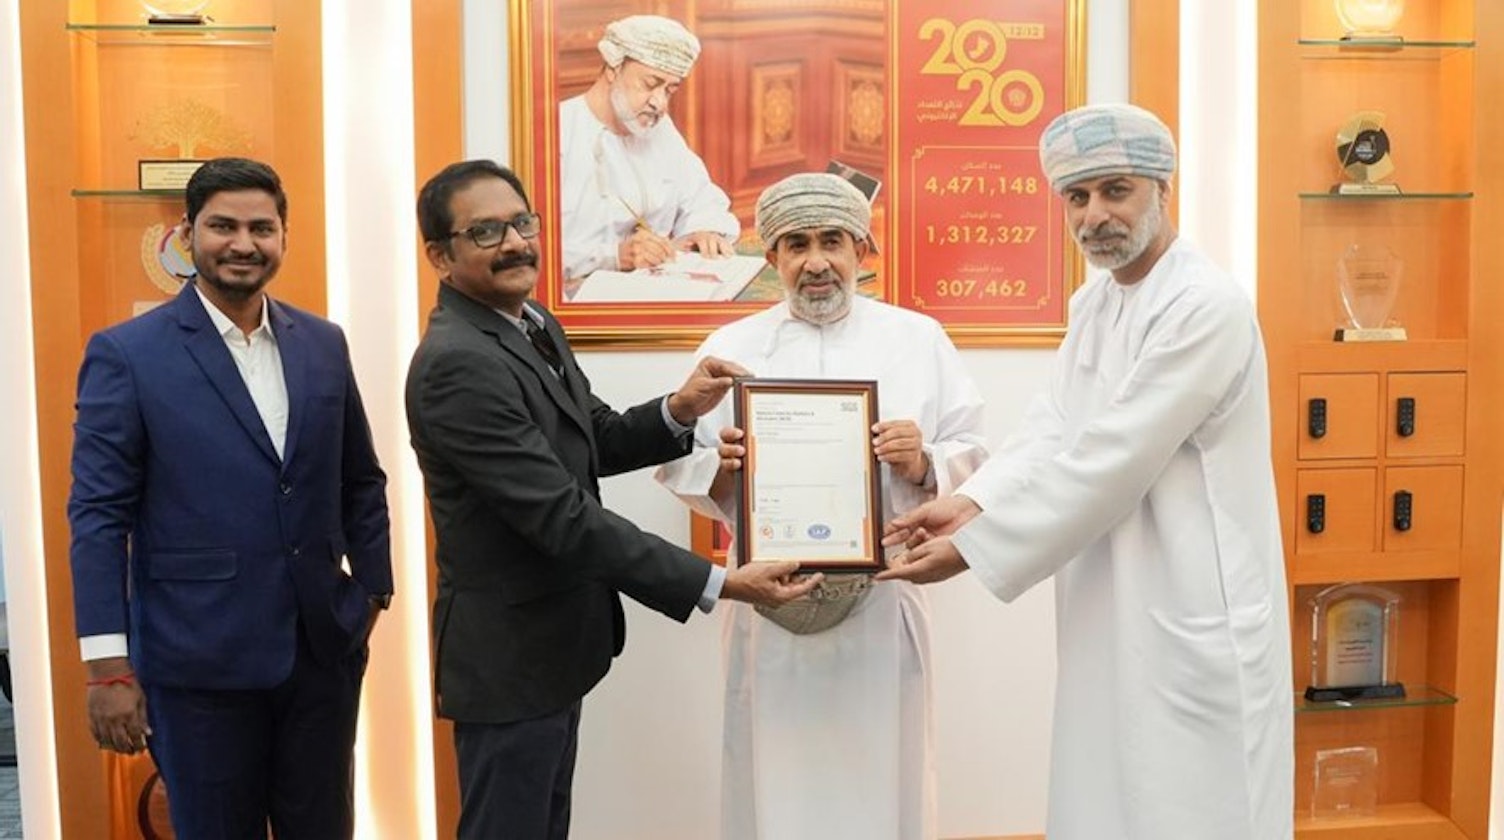 NCSI Oman awarded ISO 27001 certificate by SGS.